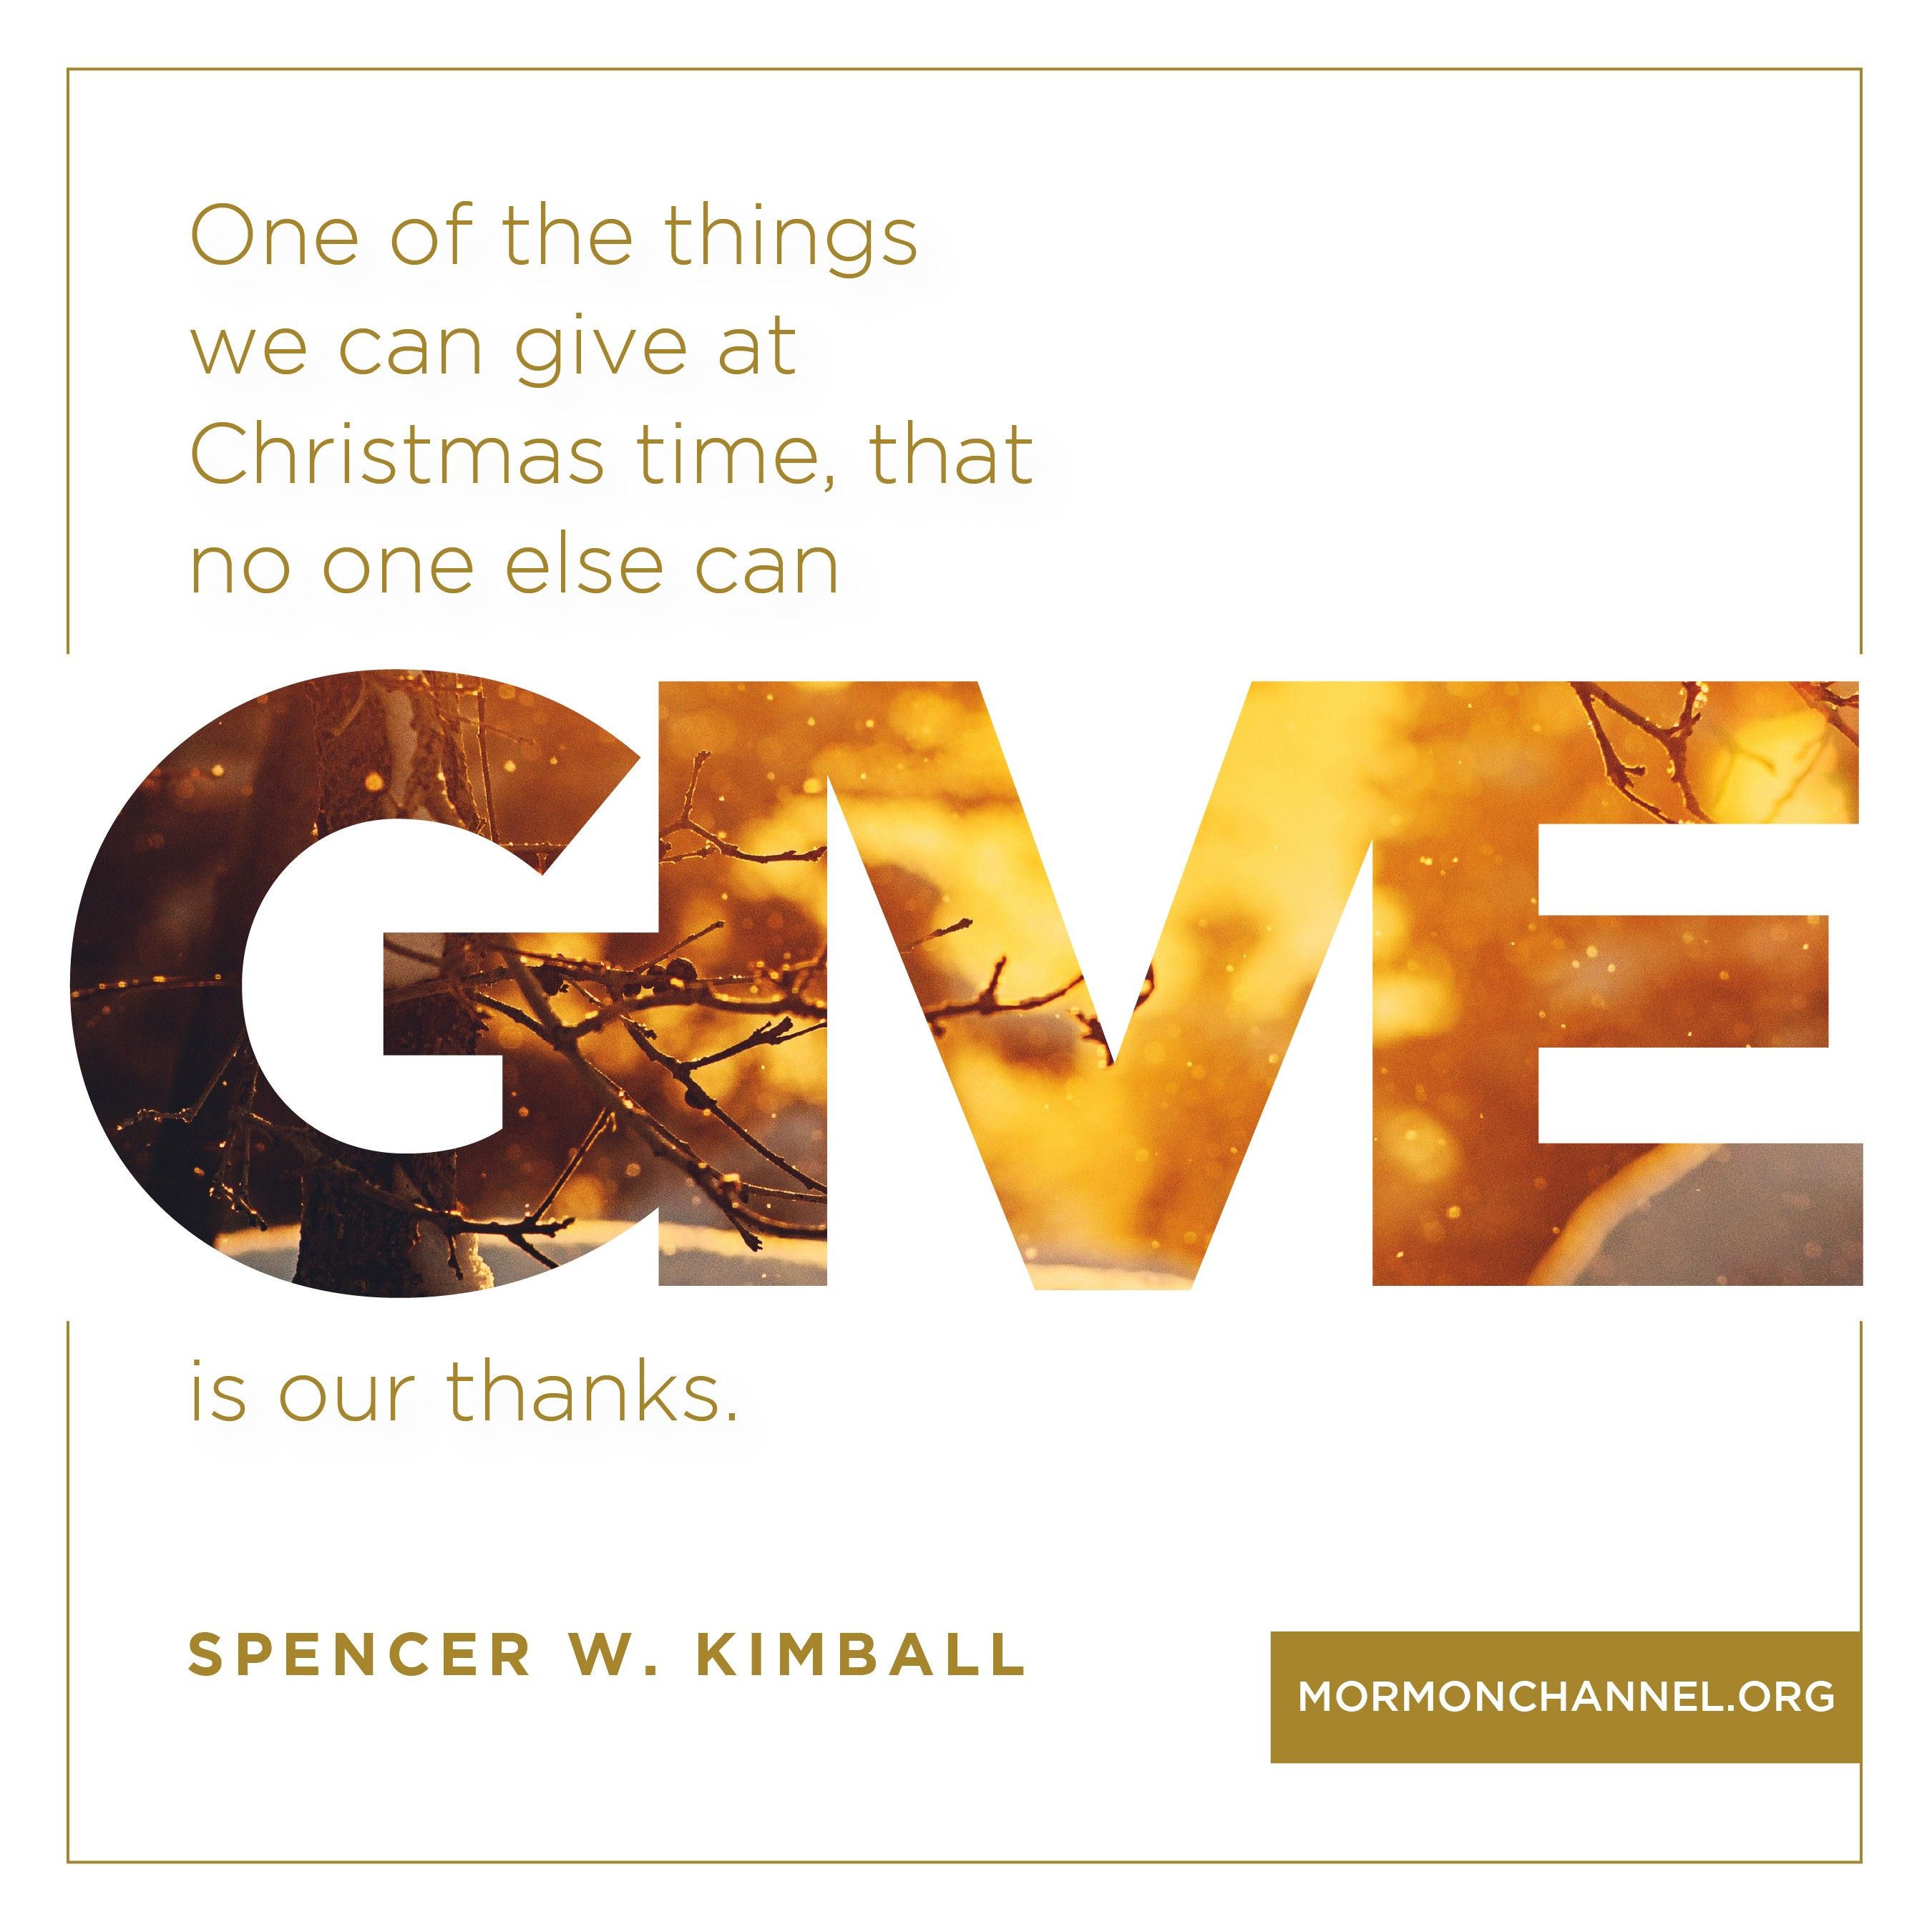 “One of the things we can give at Christmas time, that no one else can give, is our thanks.”—President Spencer W. Kimball, “A Gift of Gratitude” © undefined ipCode 1.